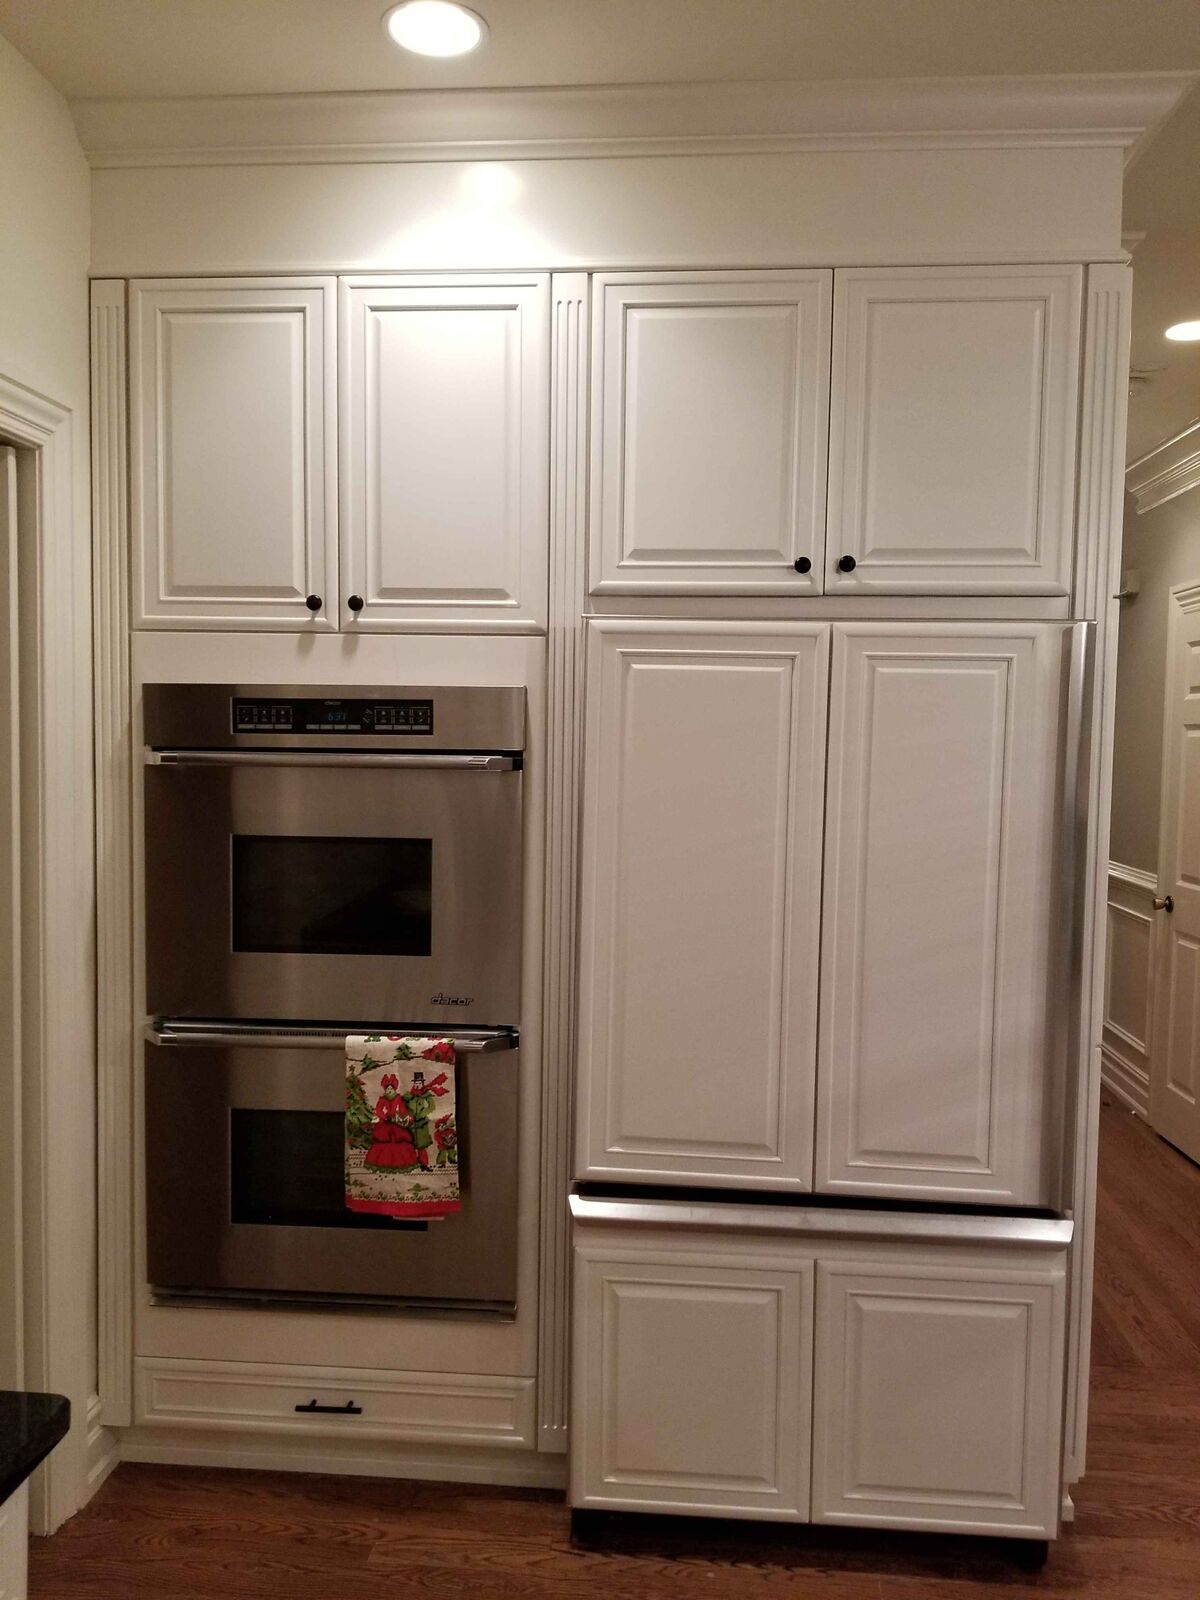 Interior kitchen cabinet painting by CertaPro Painters in Hopewell, NJ